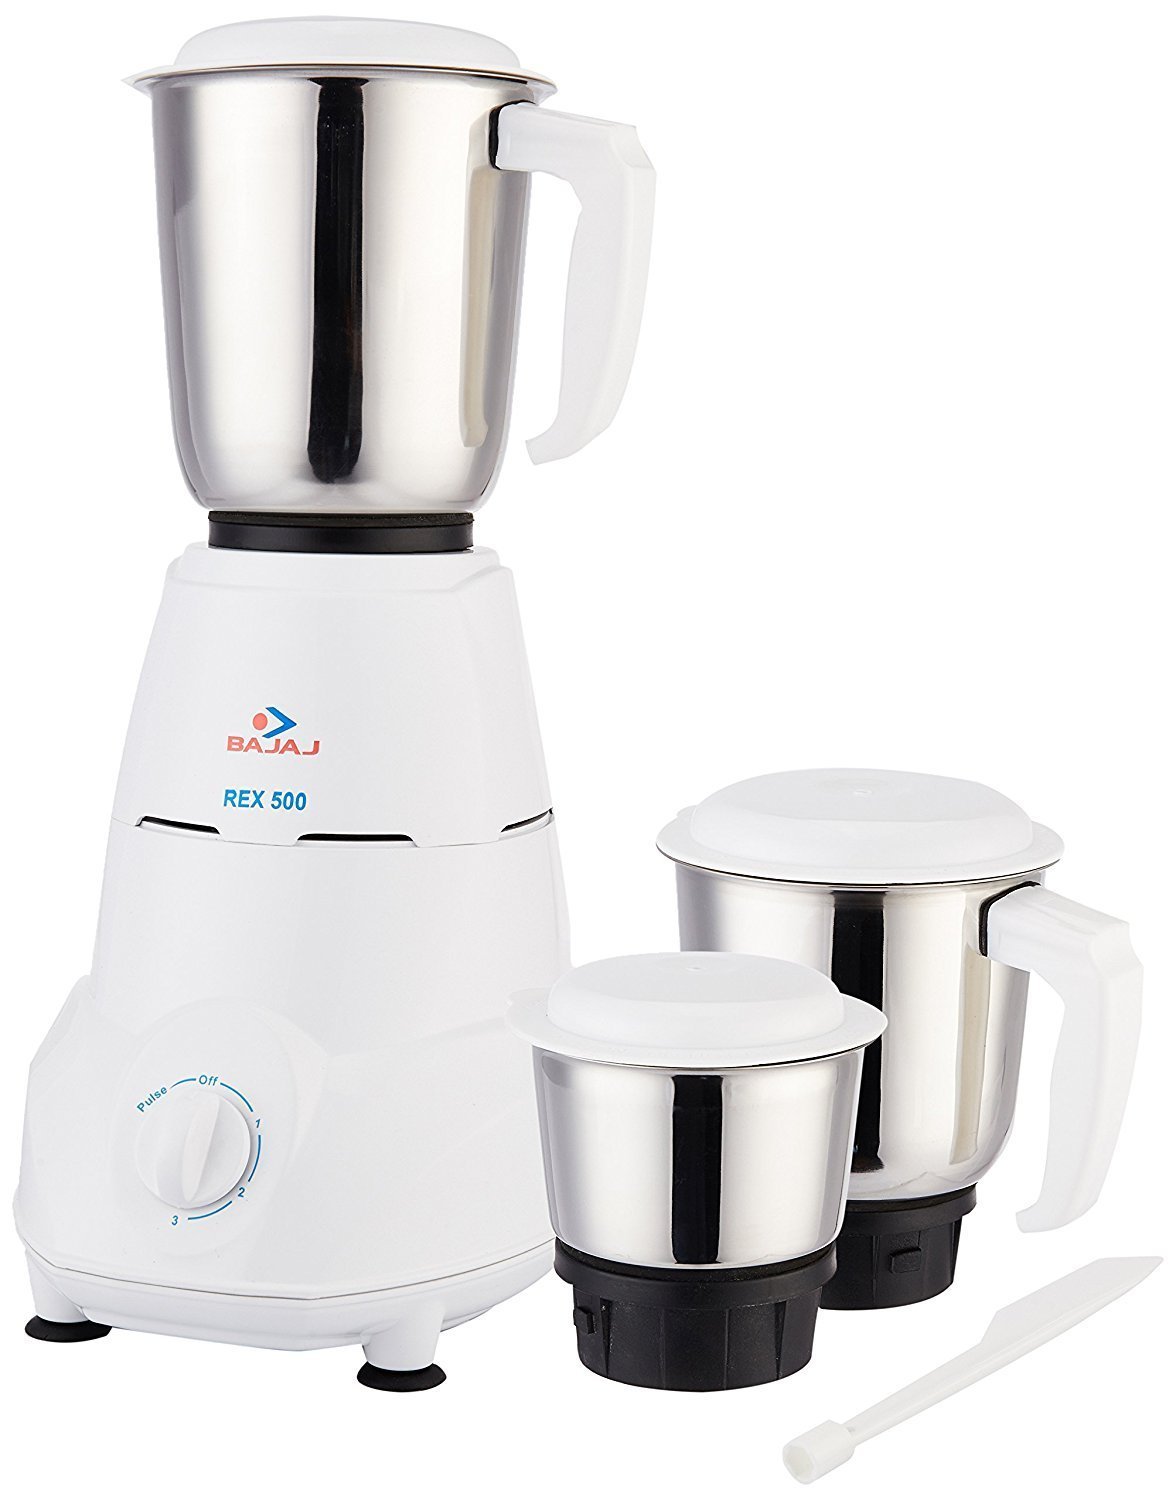 Amazon Offers- Get Upto 50% Off On Kitchen & Home Appliances